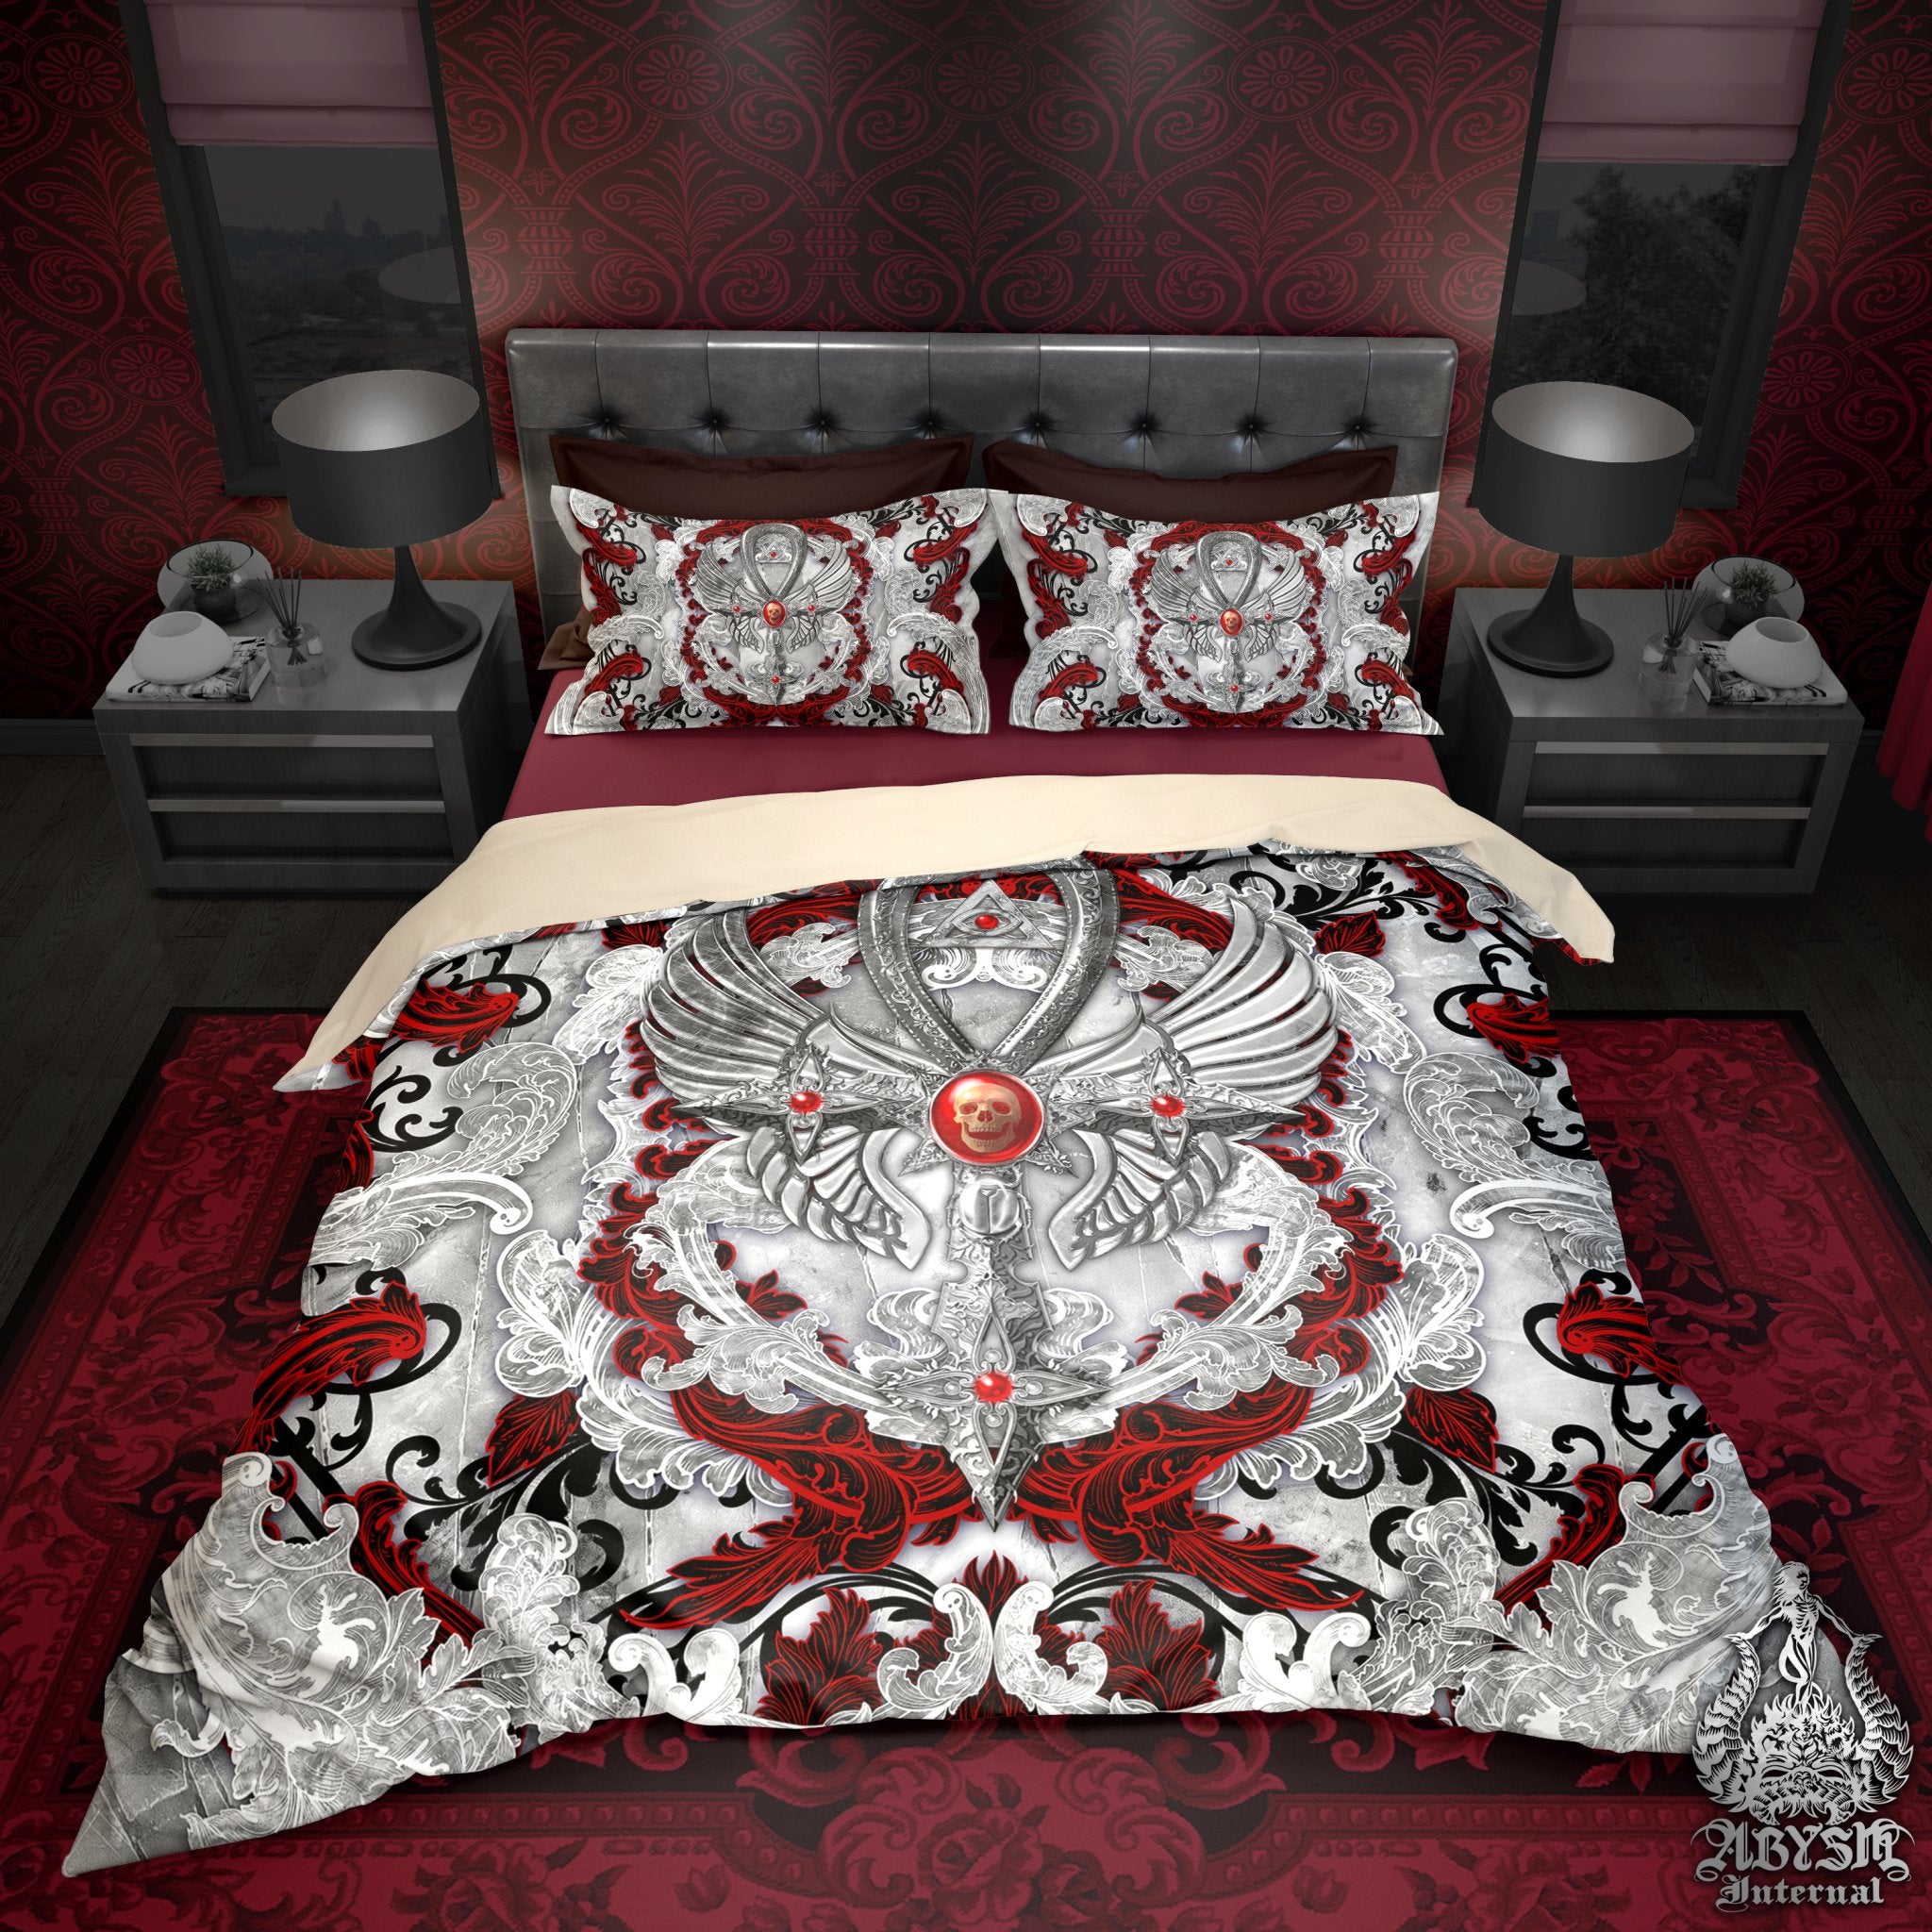 White Goth Bedding Set, Gothic Comforter or Duvet, Goth Bed Cover, Bedroom Decor, King, Queen & Twin Size - Bloody Ankh, Red, Purple, Black, 4 Colors - Abysm Internal